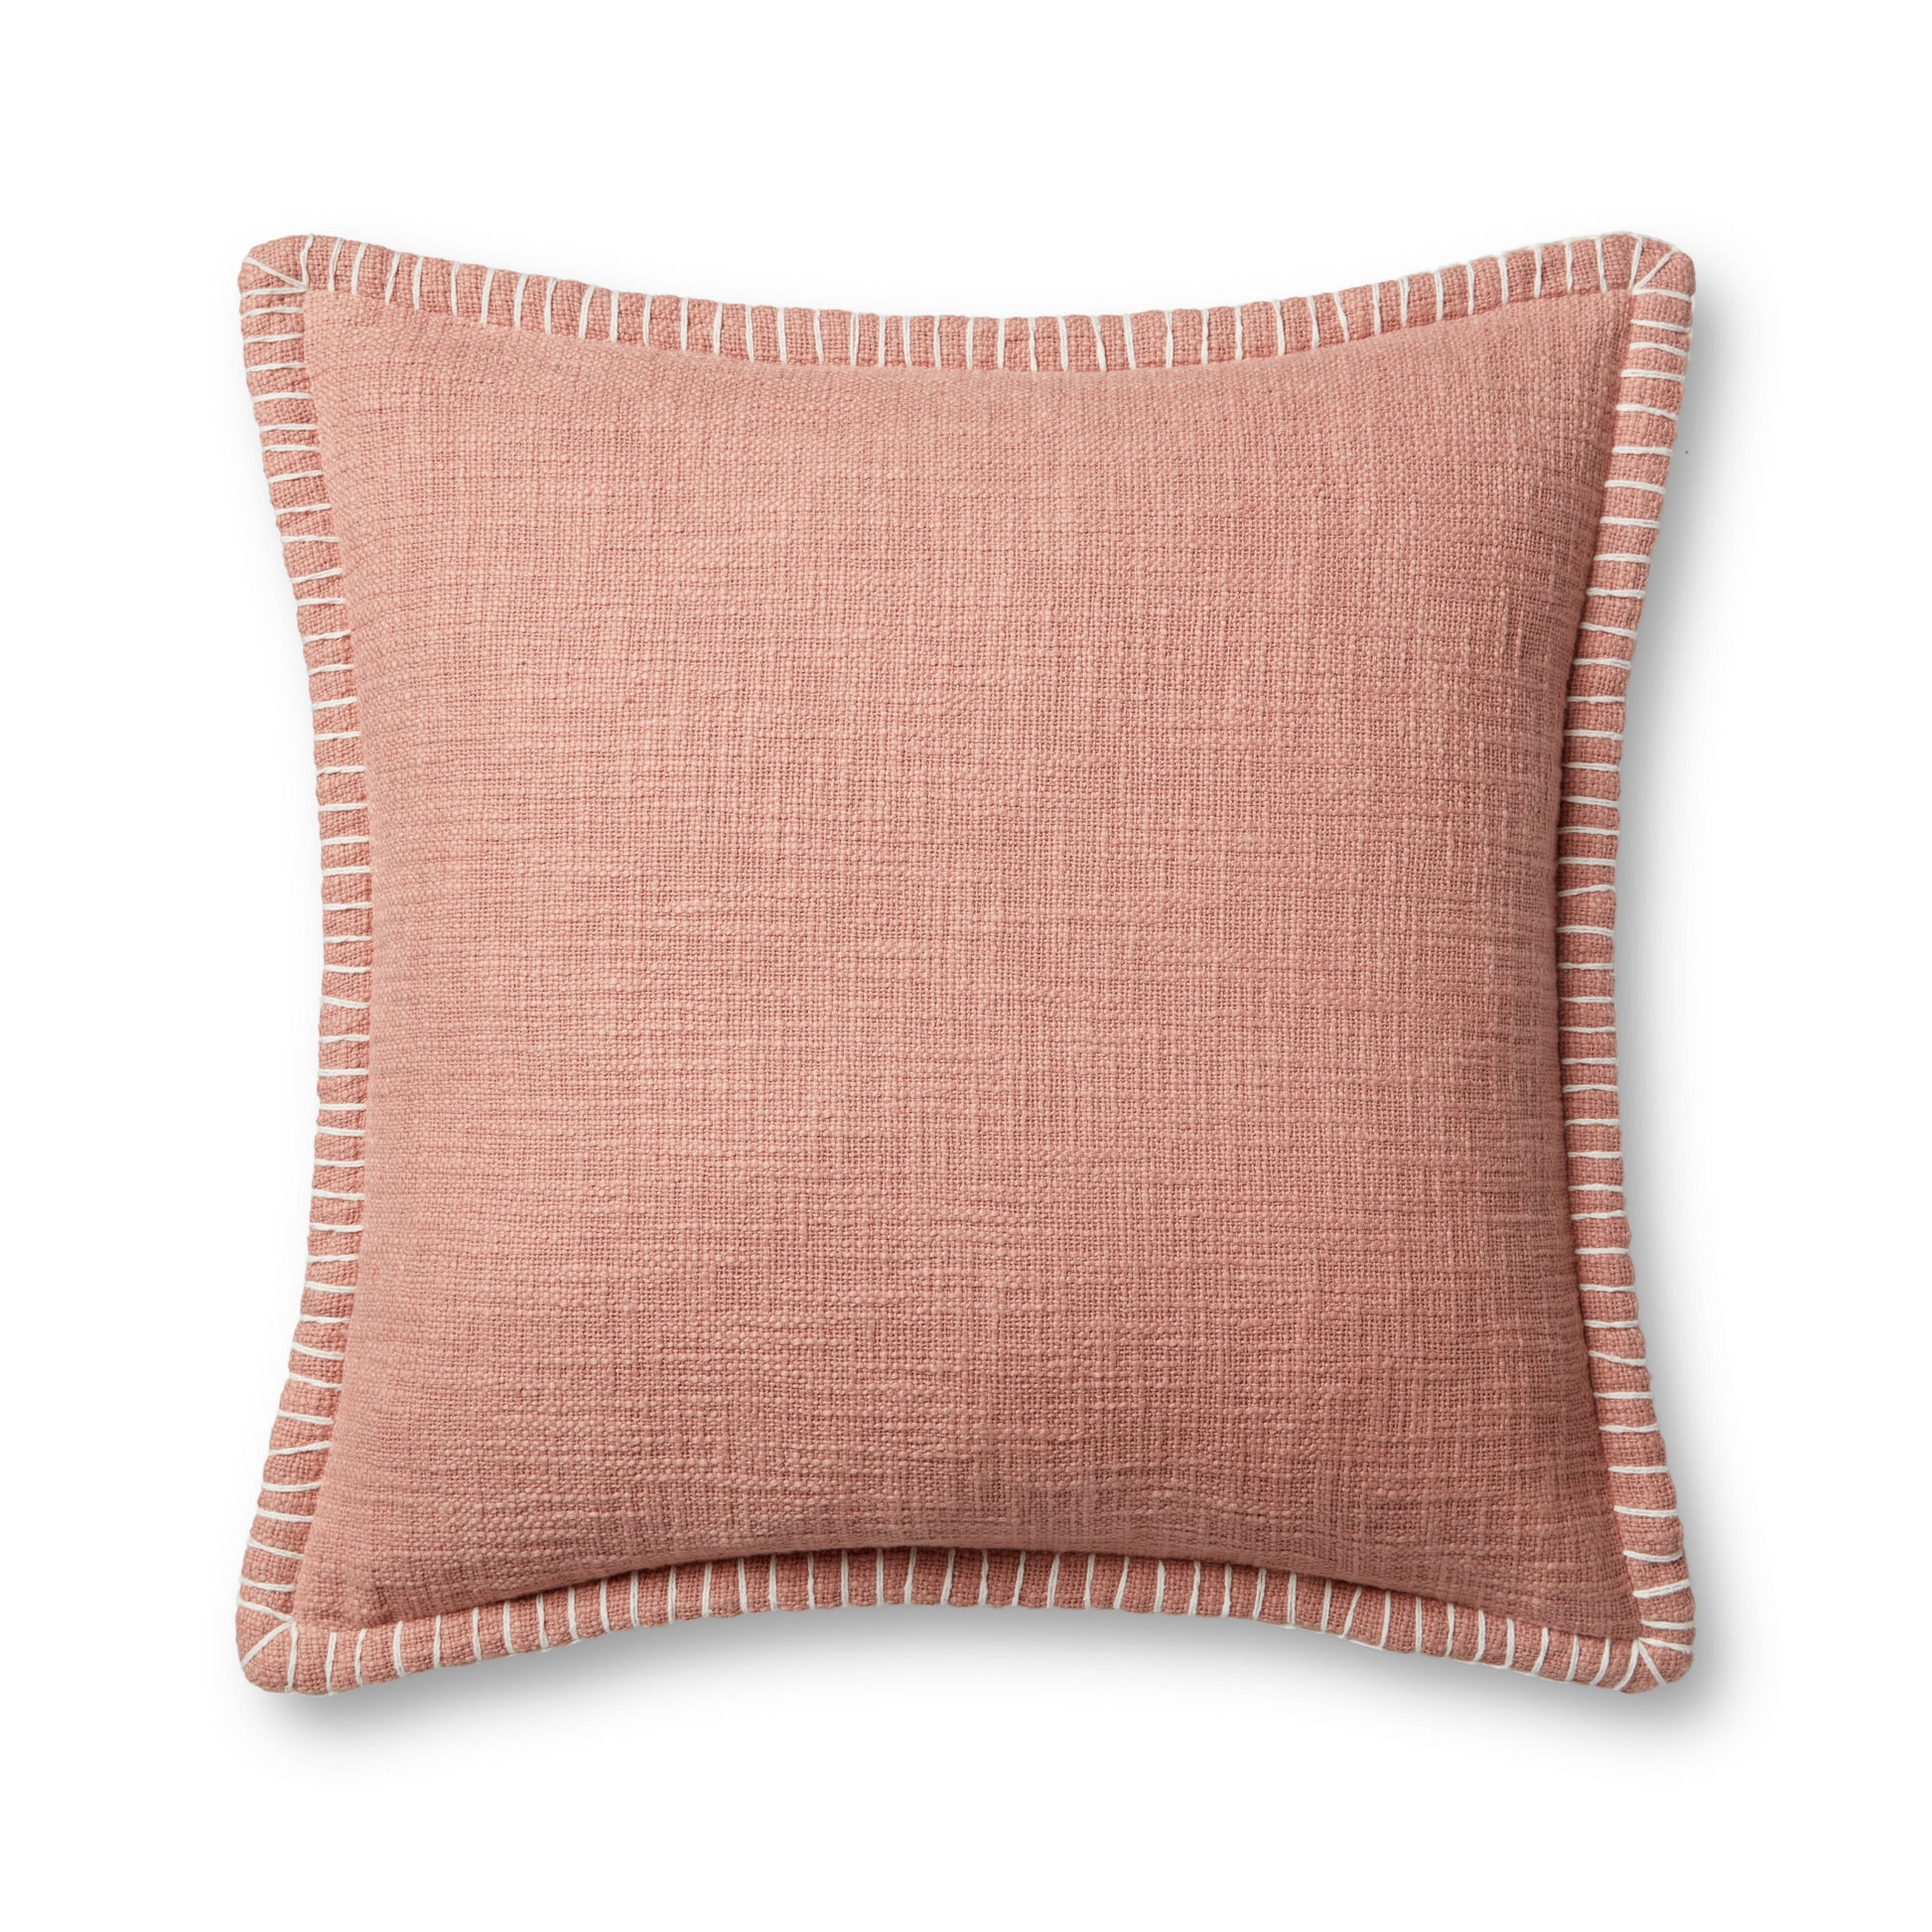 Photo of a pillow;  PLL0109 Pink 22'' x 22'' Cover w/Poly Pillow